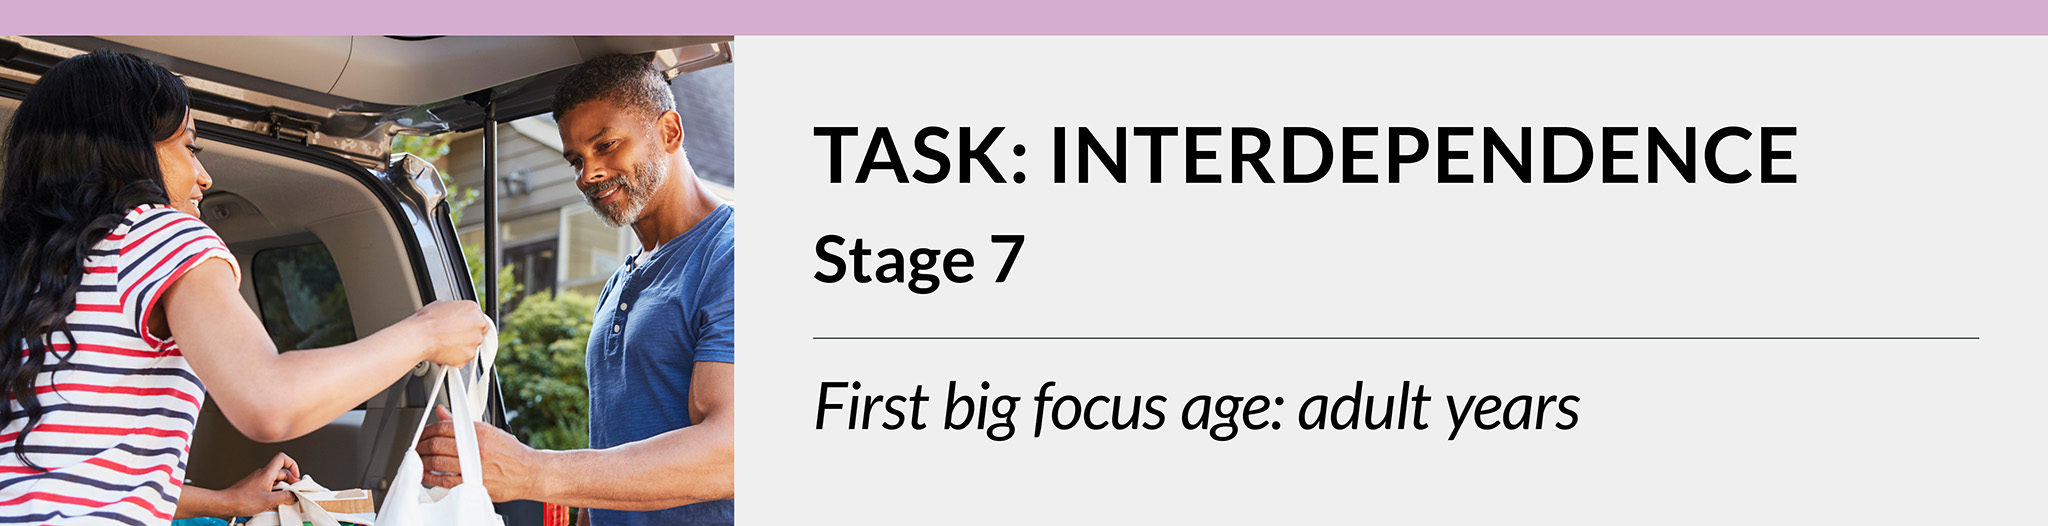 Task: Interdependence. Stage 7. First big focus age: adult years.